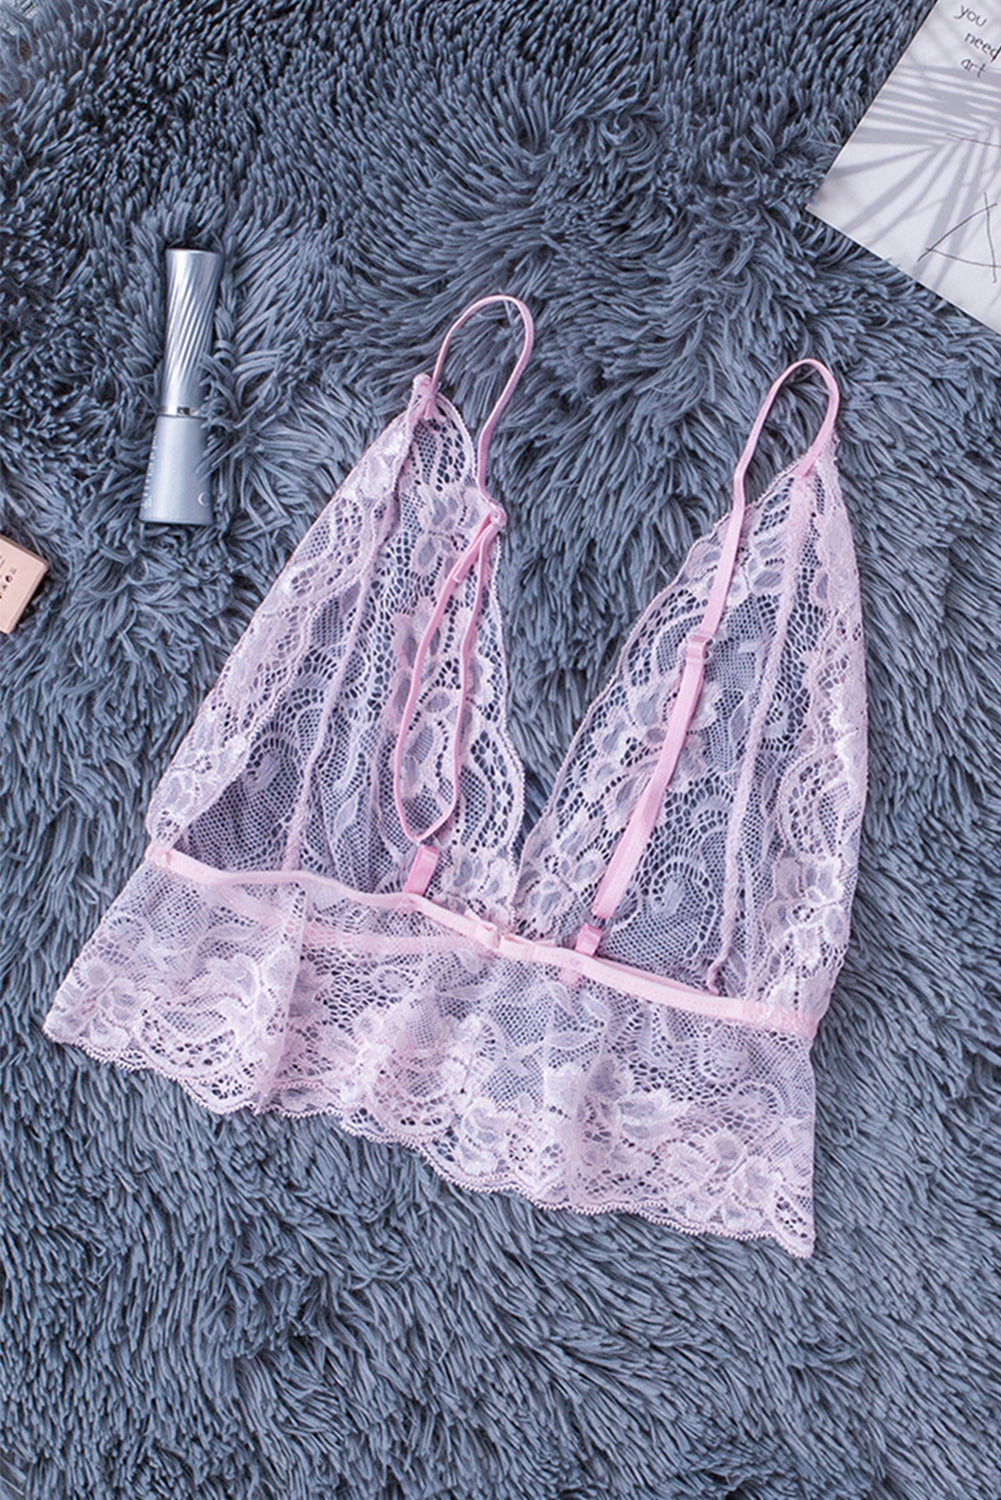 Chic Pink Floral Lace Triangle Bralette Lingerie